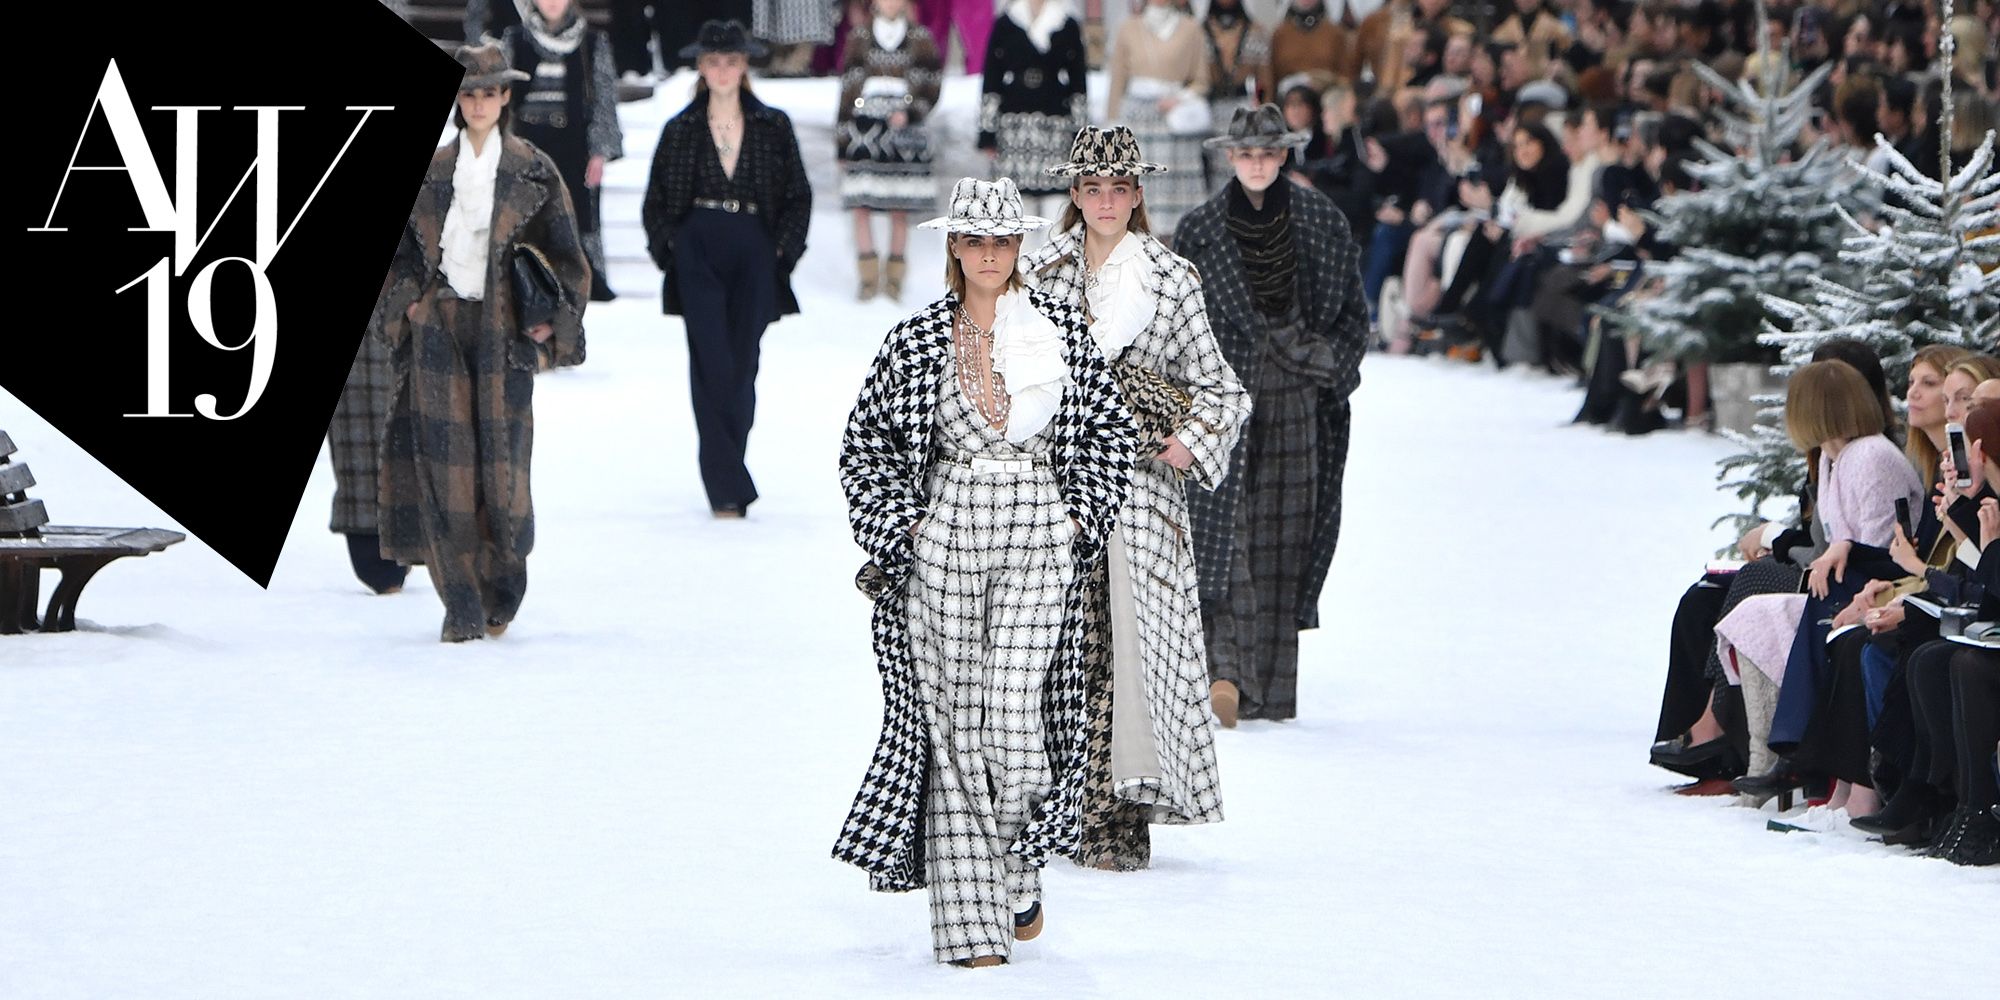 Lagerfeld retains Coco Chanel strengths in Paris fashion week spectacle, Chanel